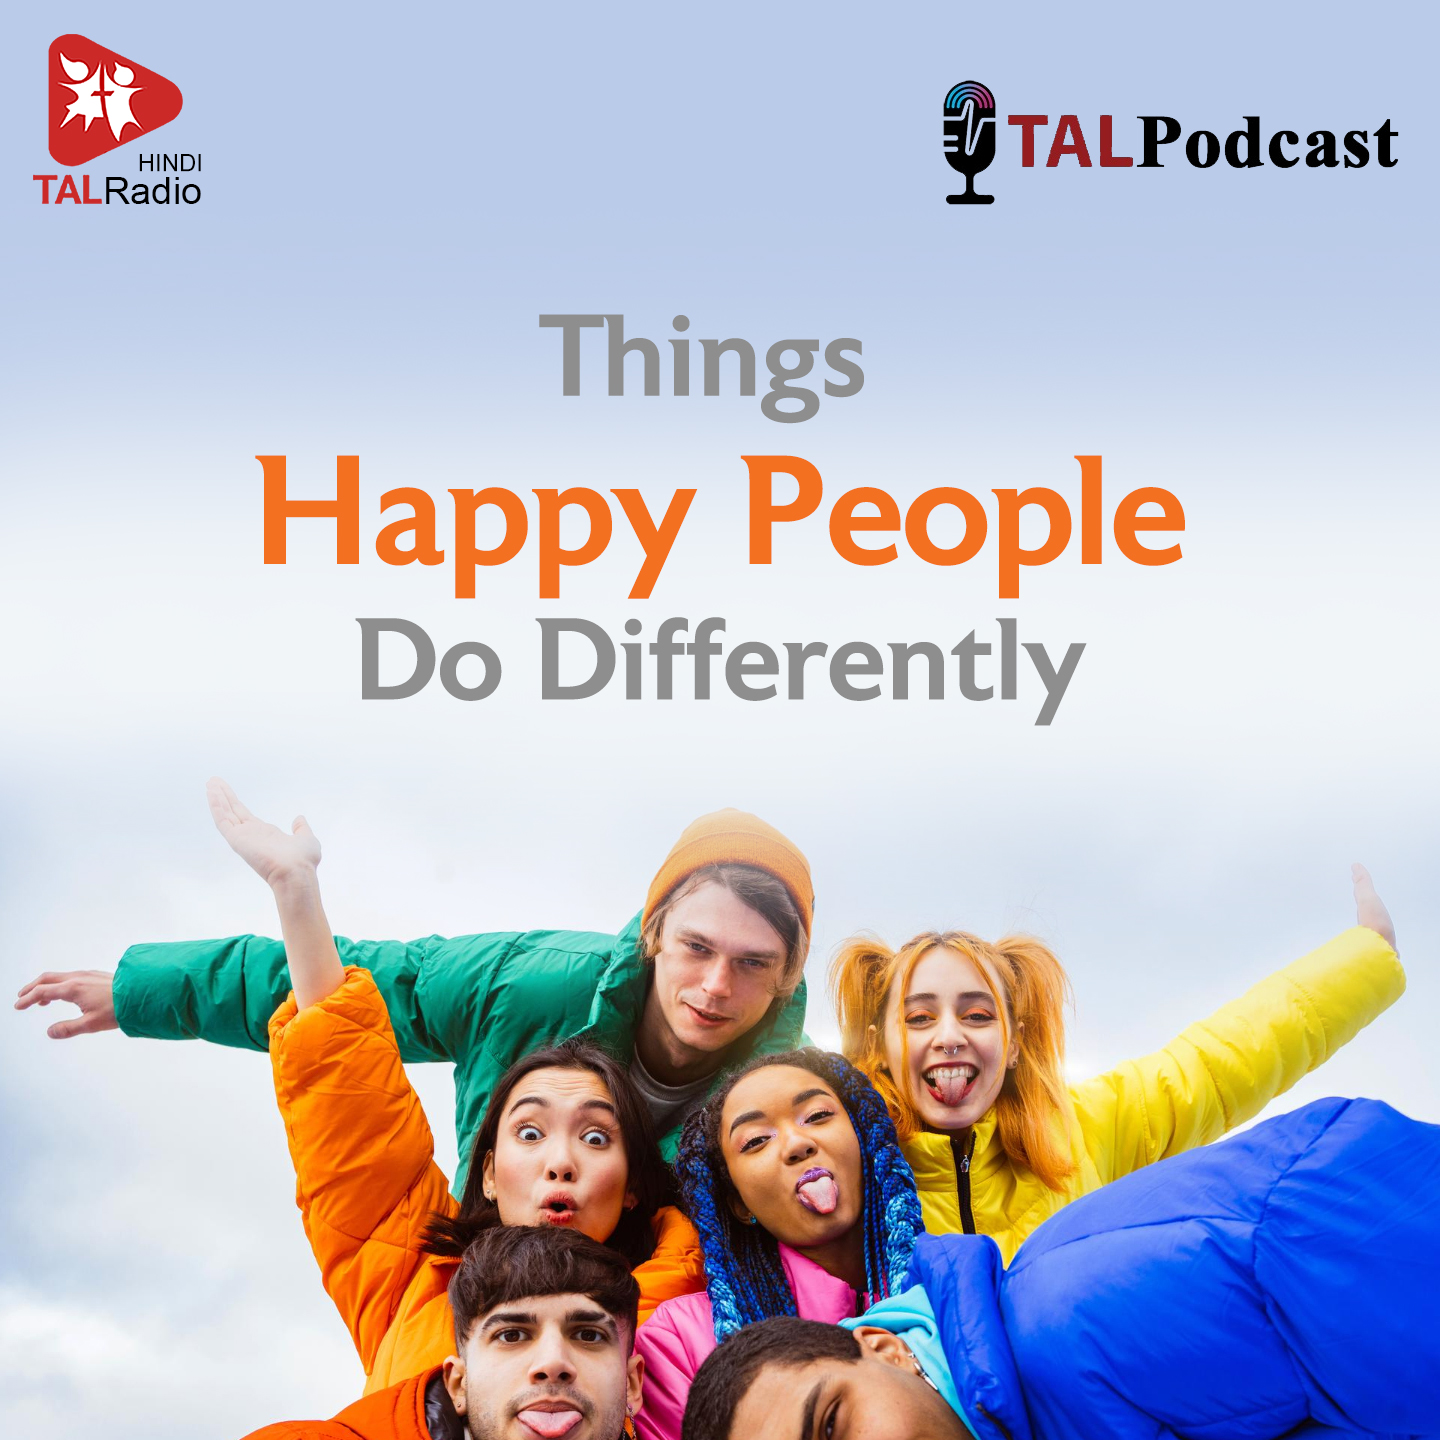 Things Happy People Do Differently